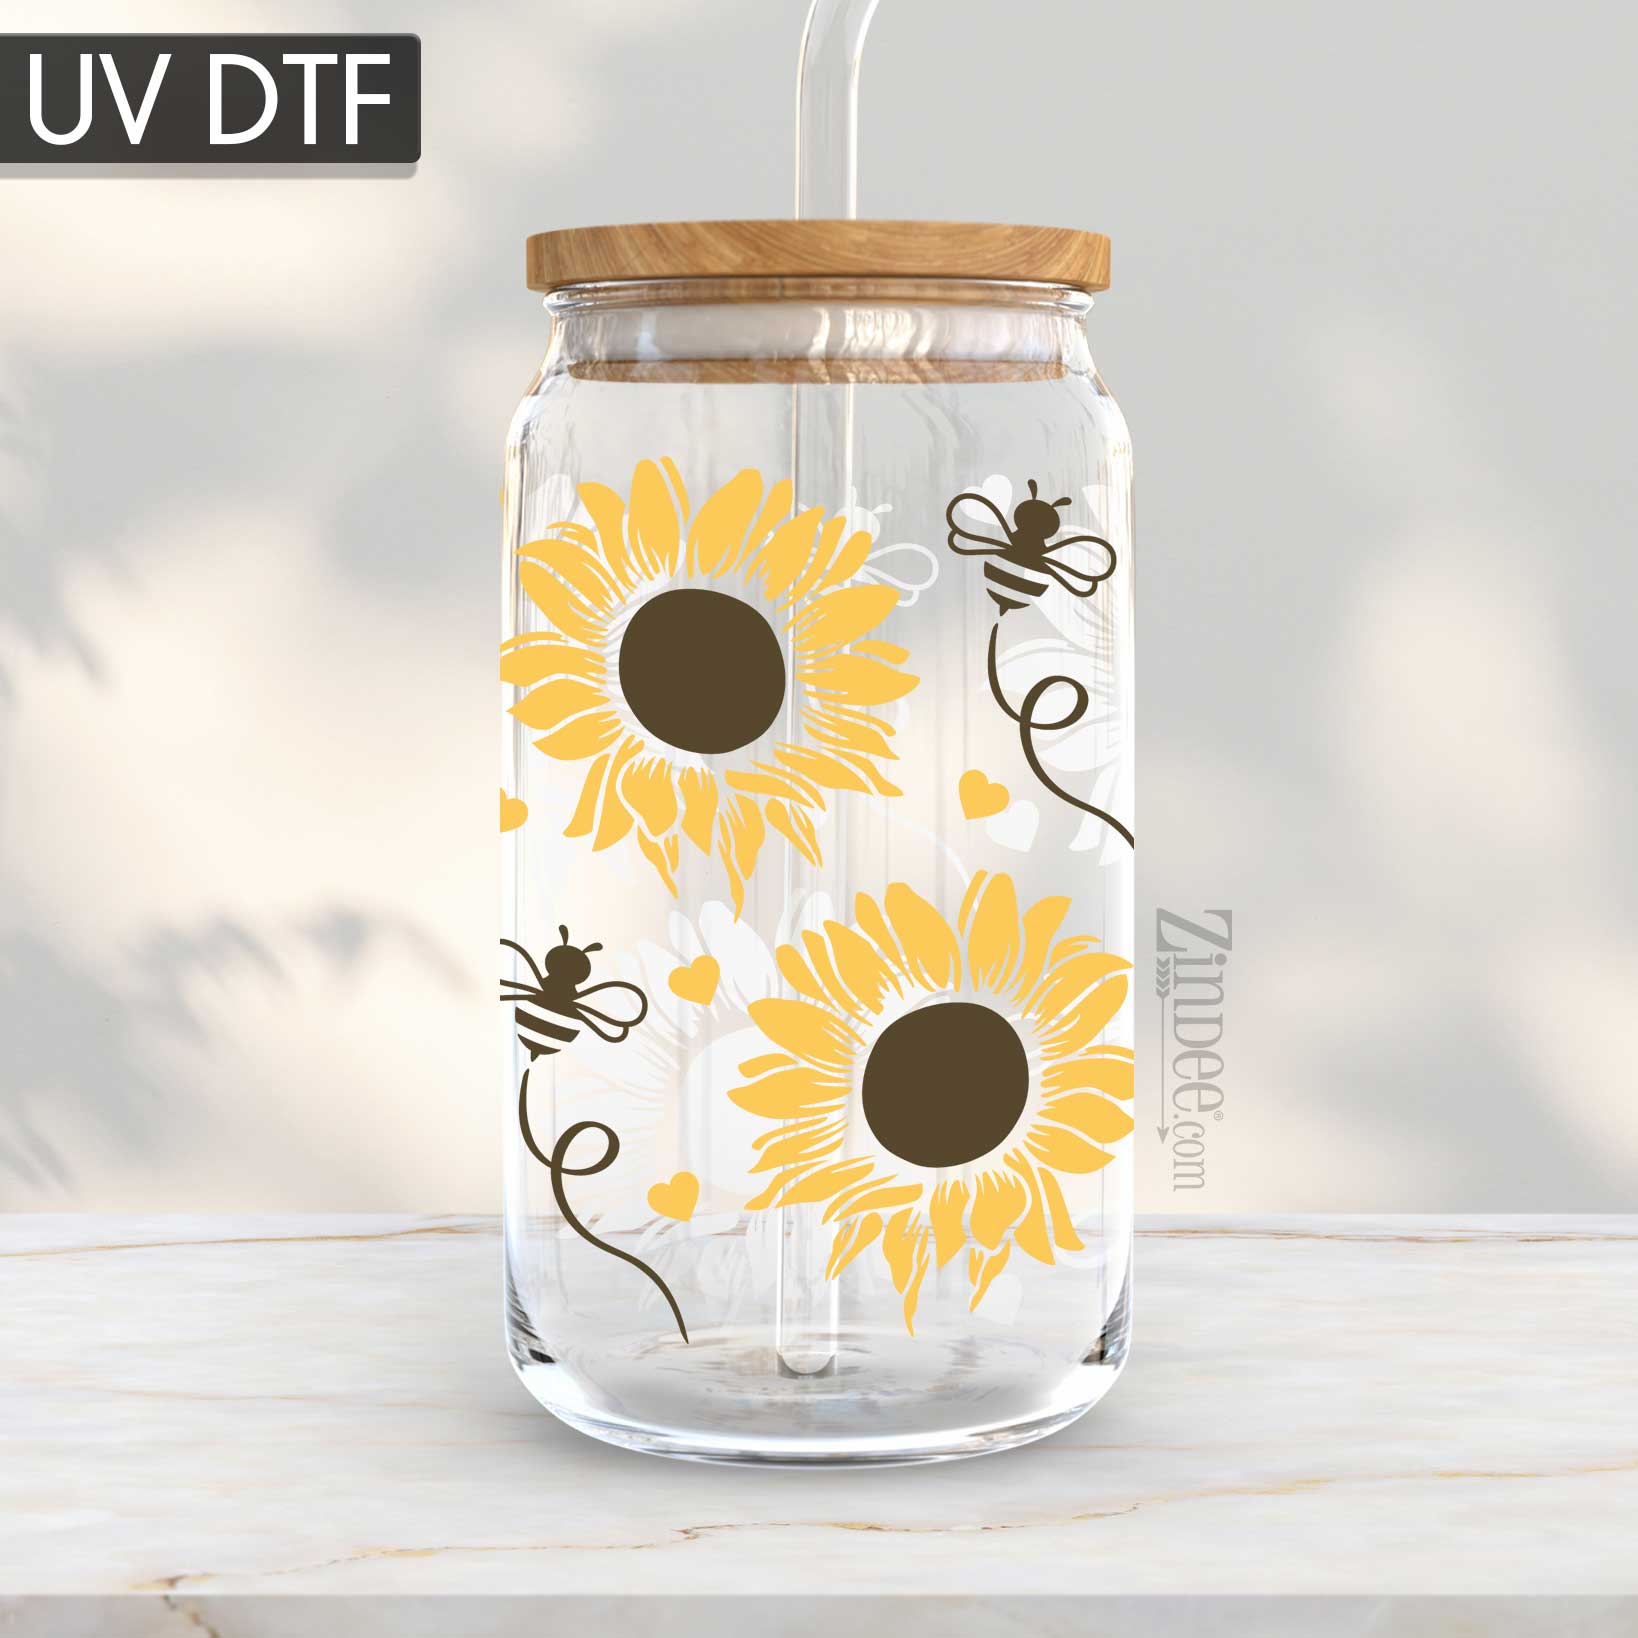 Sunflower and Bees UV DTF Wrap –